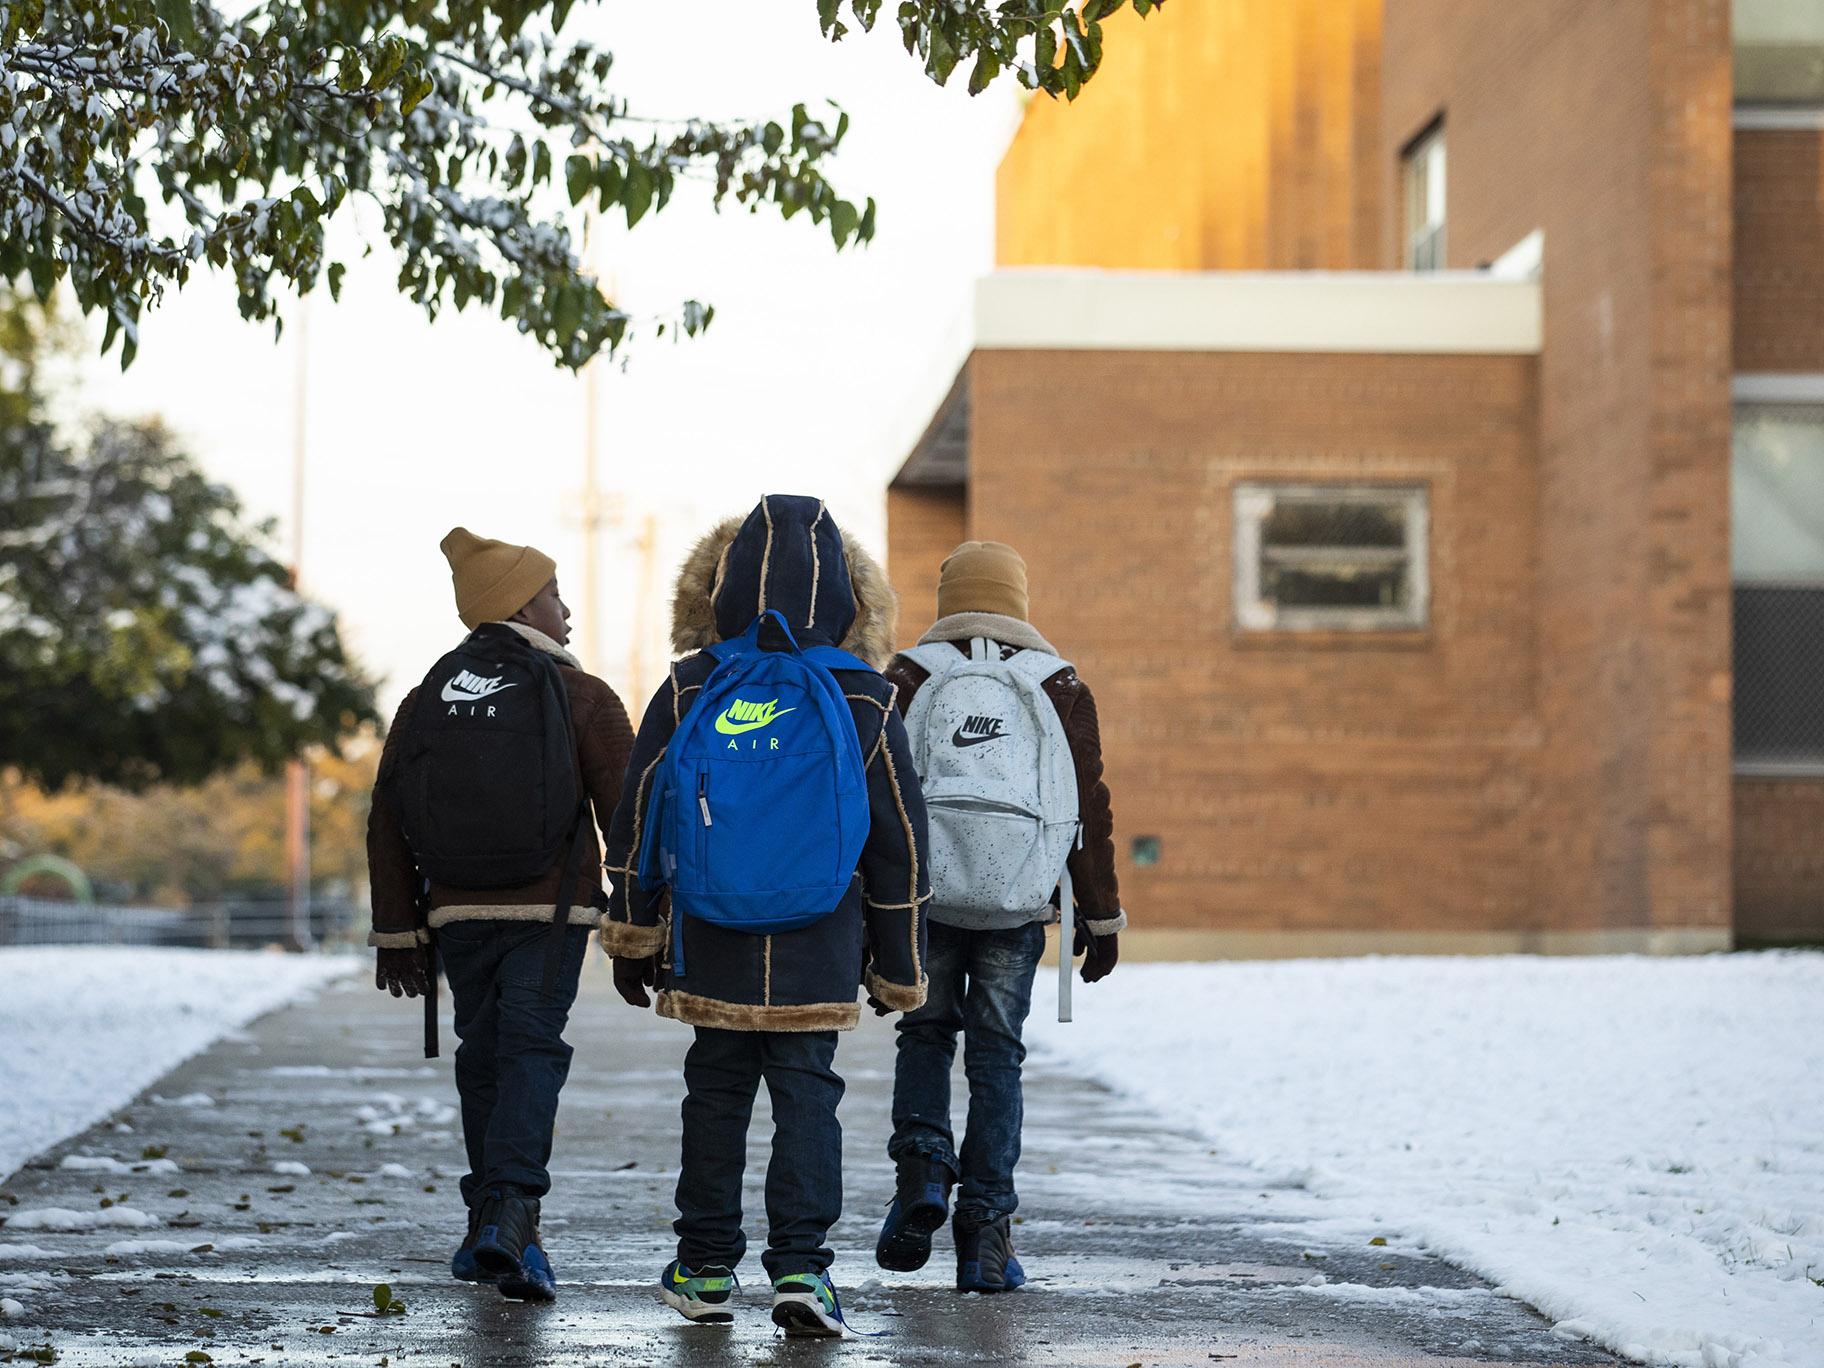 Students return to class on Friday Nov. 1, 2019 at Roswell B. Mason Elementary School on the South Side after a Chicago Teachers Union strike closed schools for 11 days. (Ashlee Rezin Garcia / Chicago Sun-Times via AP)